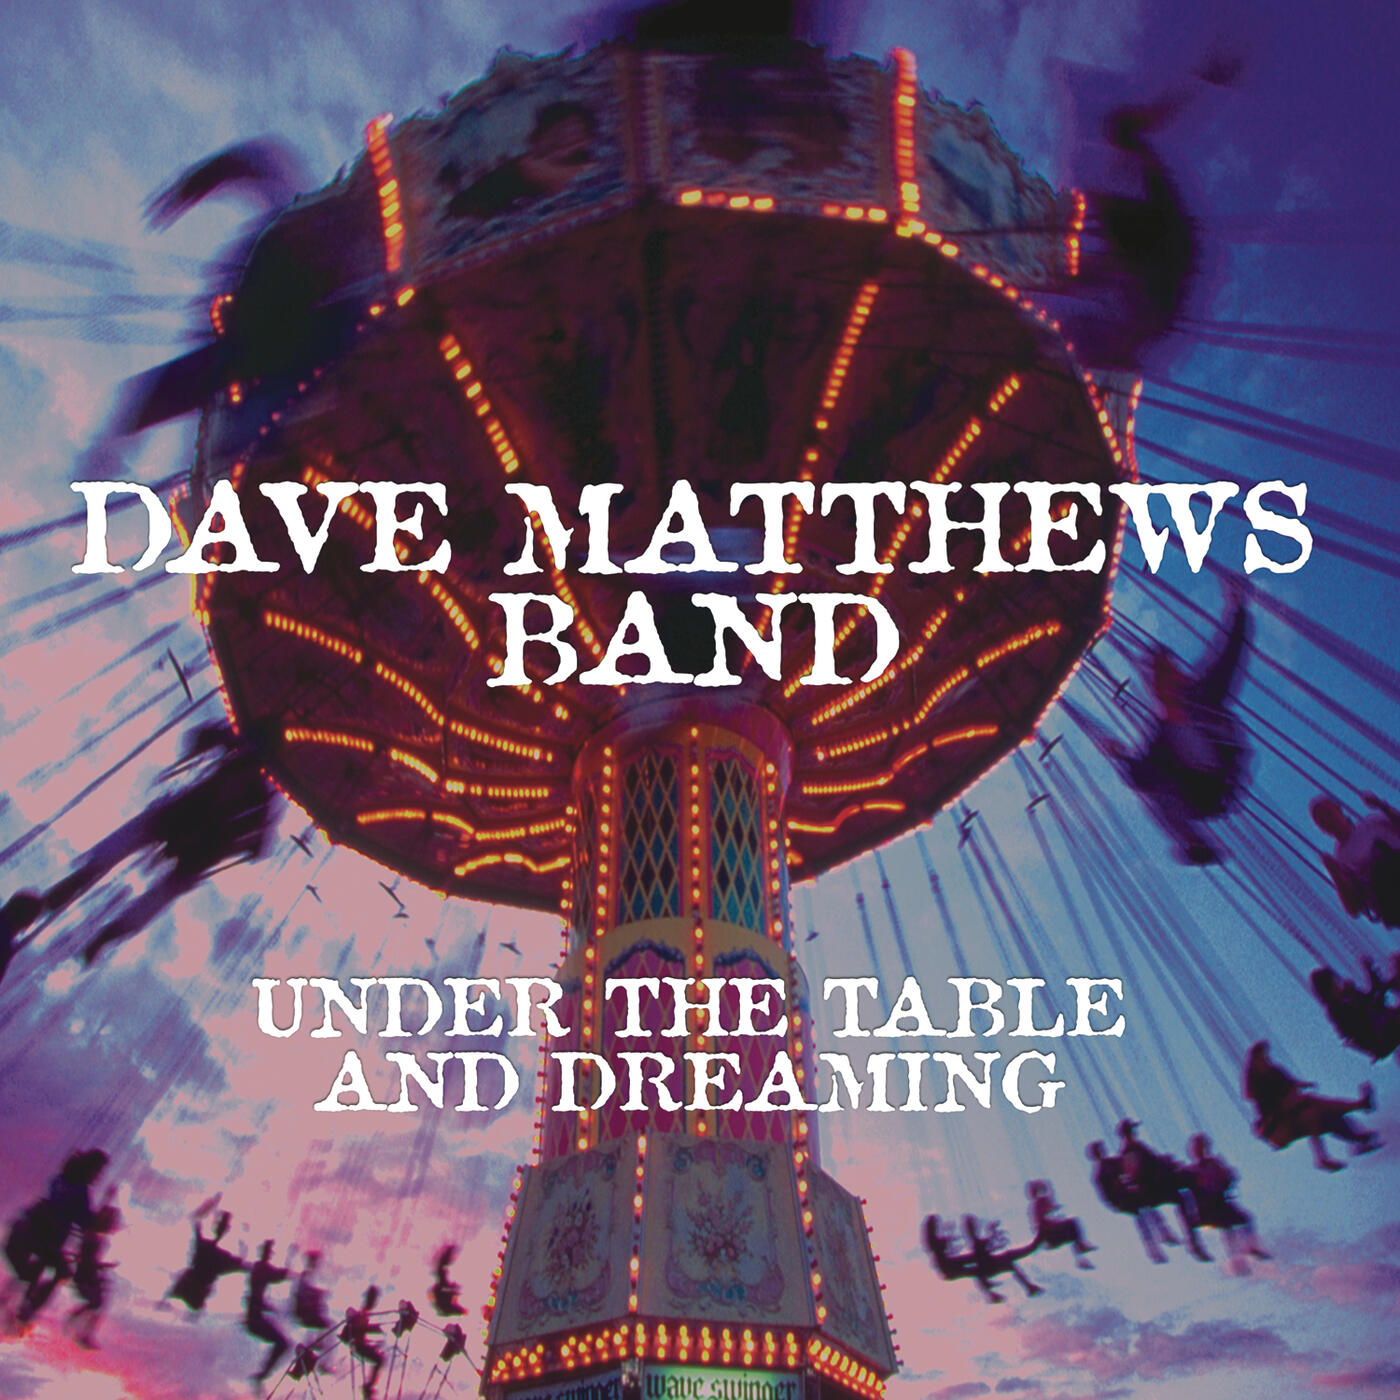 Dave Matthews Band Under the Table and Dreaming (Expanded Edition